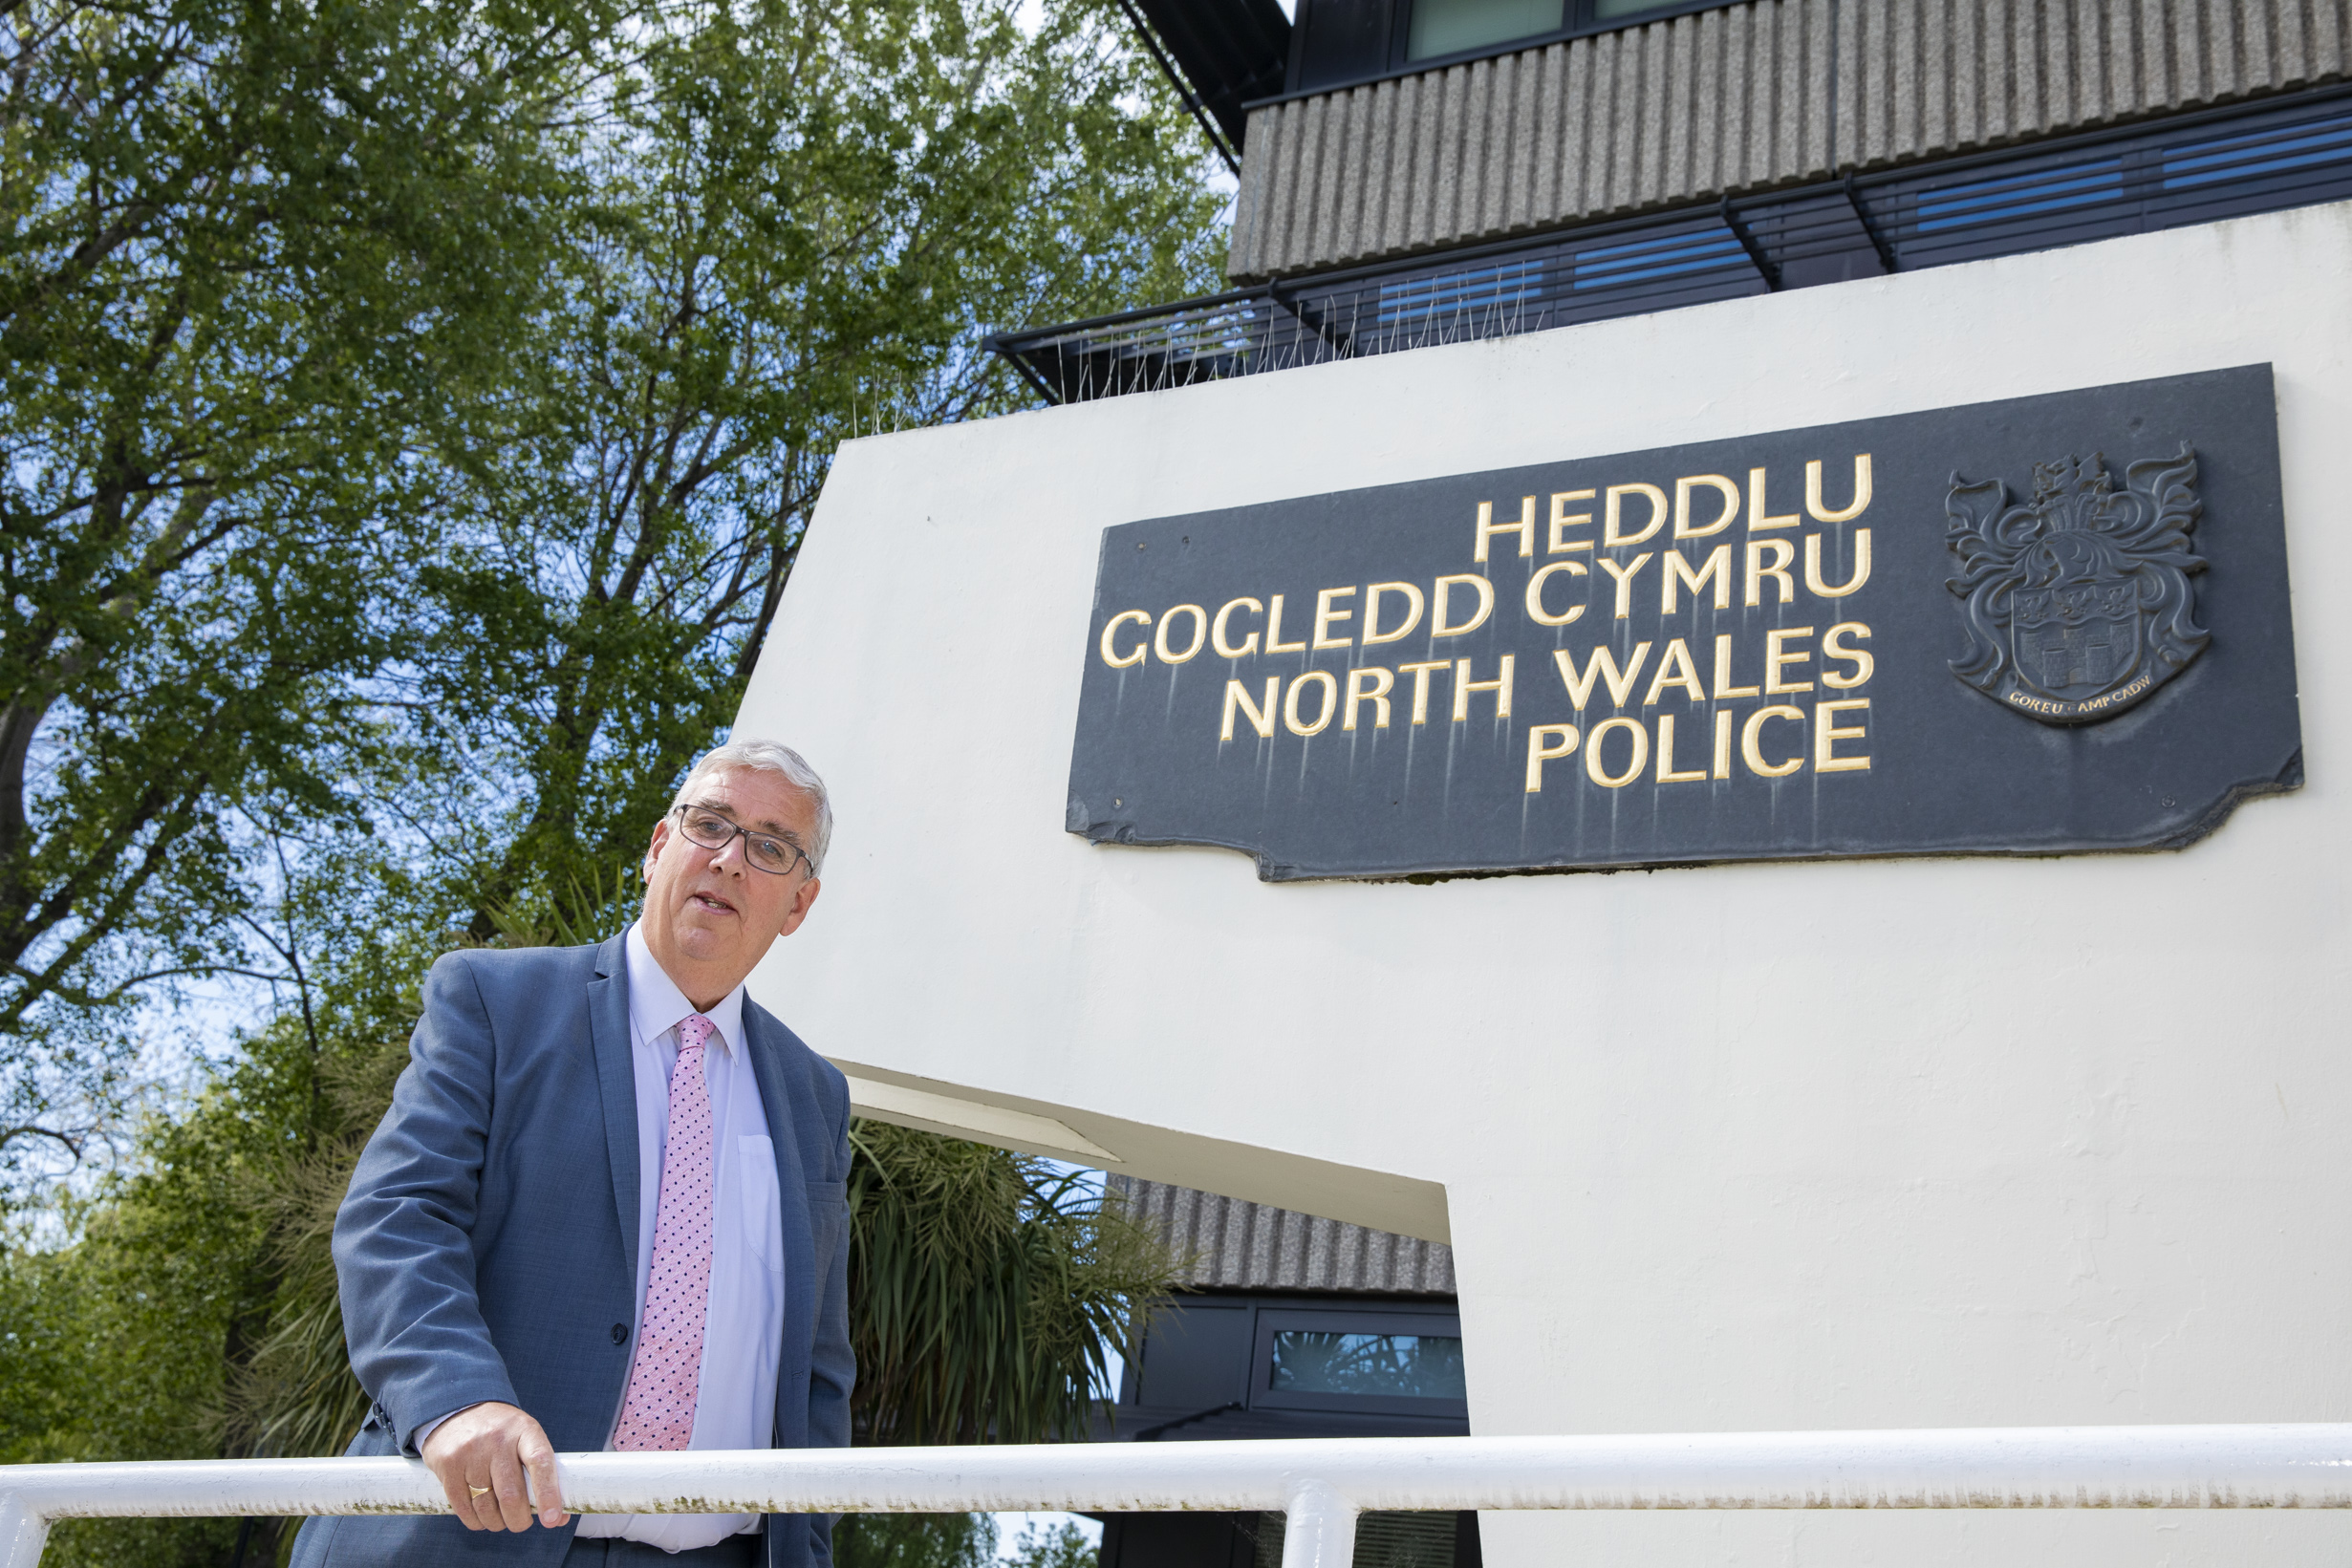 Police boss hires staff to launch pioneering scheme to cut crime